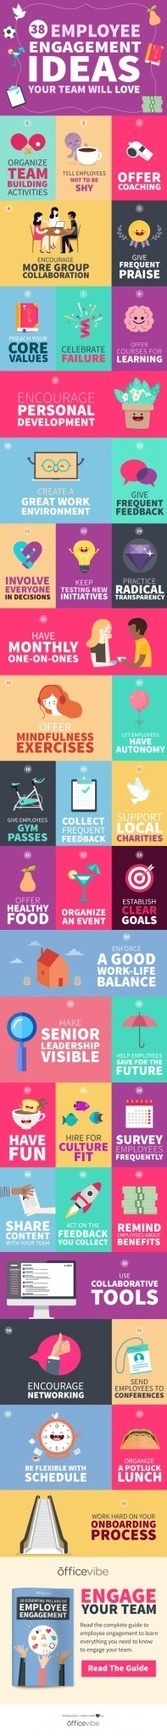 38 Employee Engagement Ideas Your Team Will Love Infographic | #HR #RRHH Making love and making personal #branding #leadership | Scoop.it